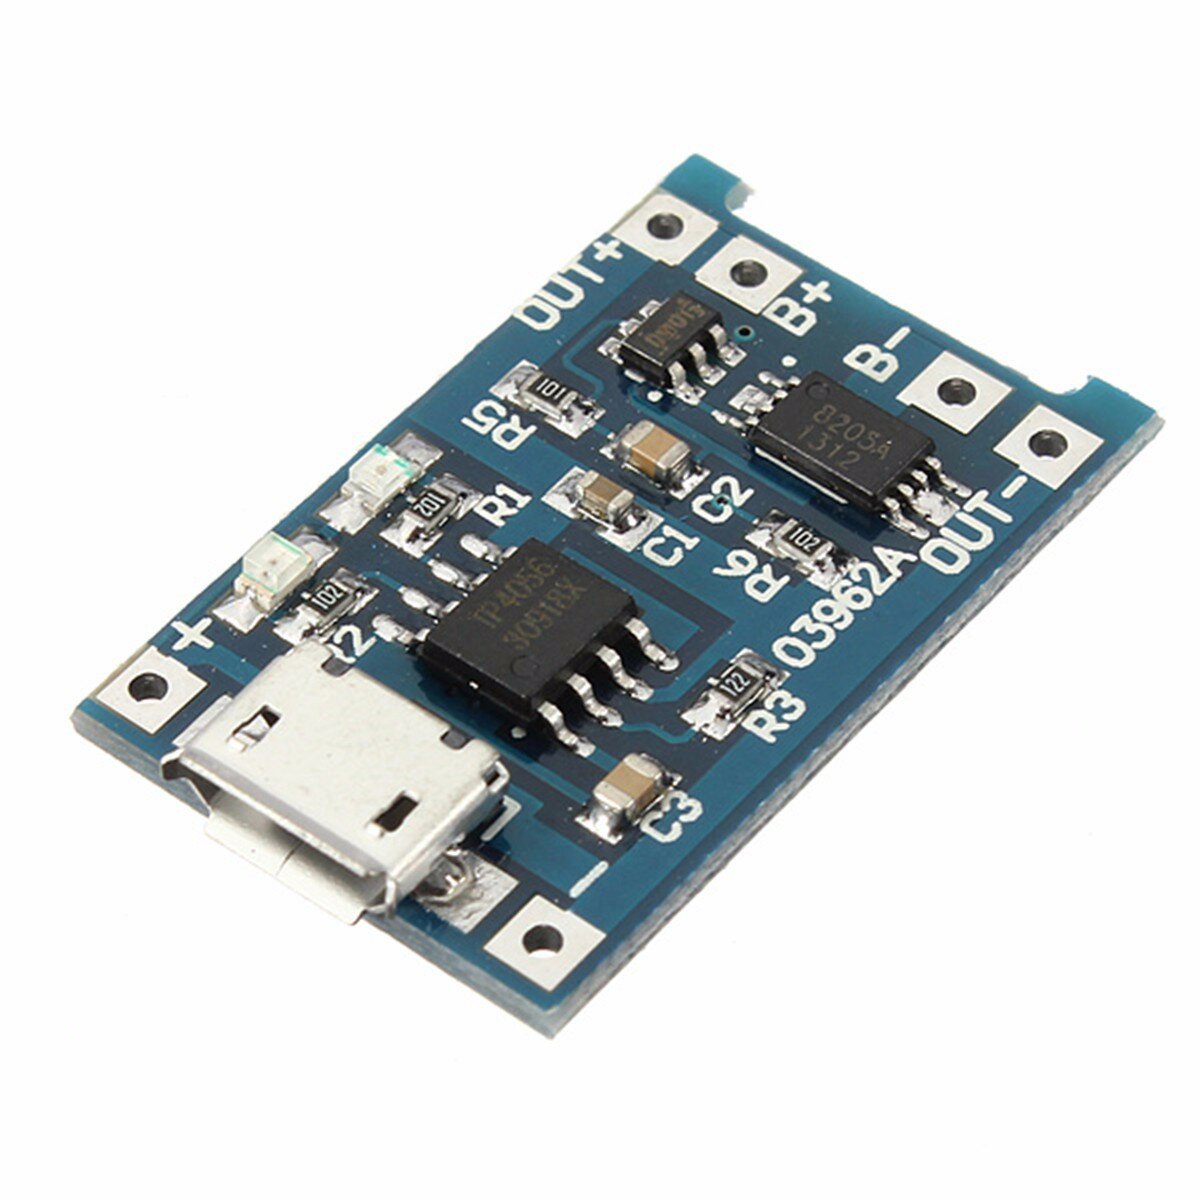 

3Pcs USB Lithium Battery Charger Module Board with Charging and Protection Integration Board